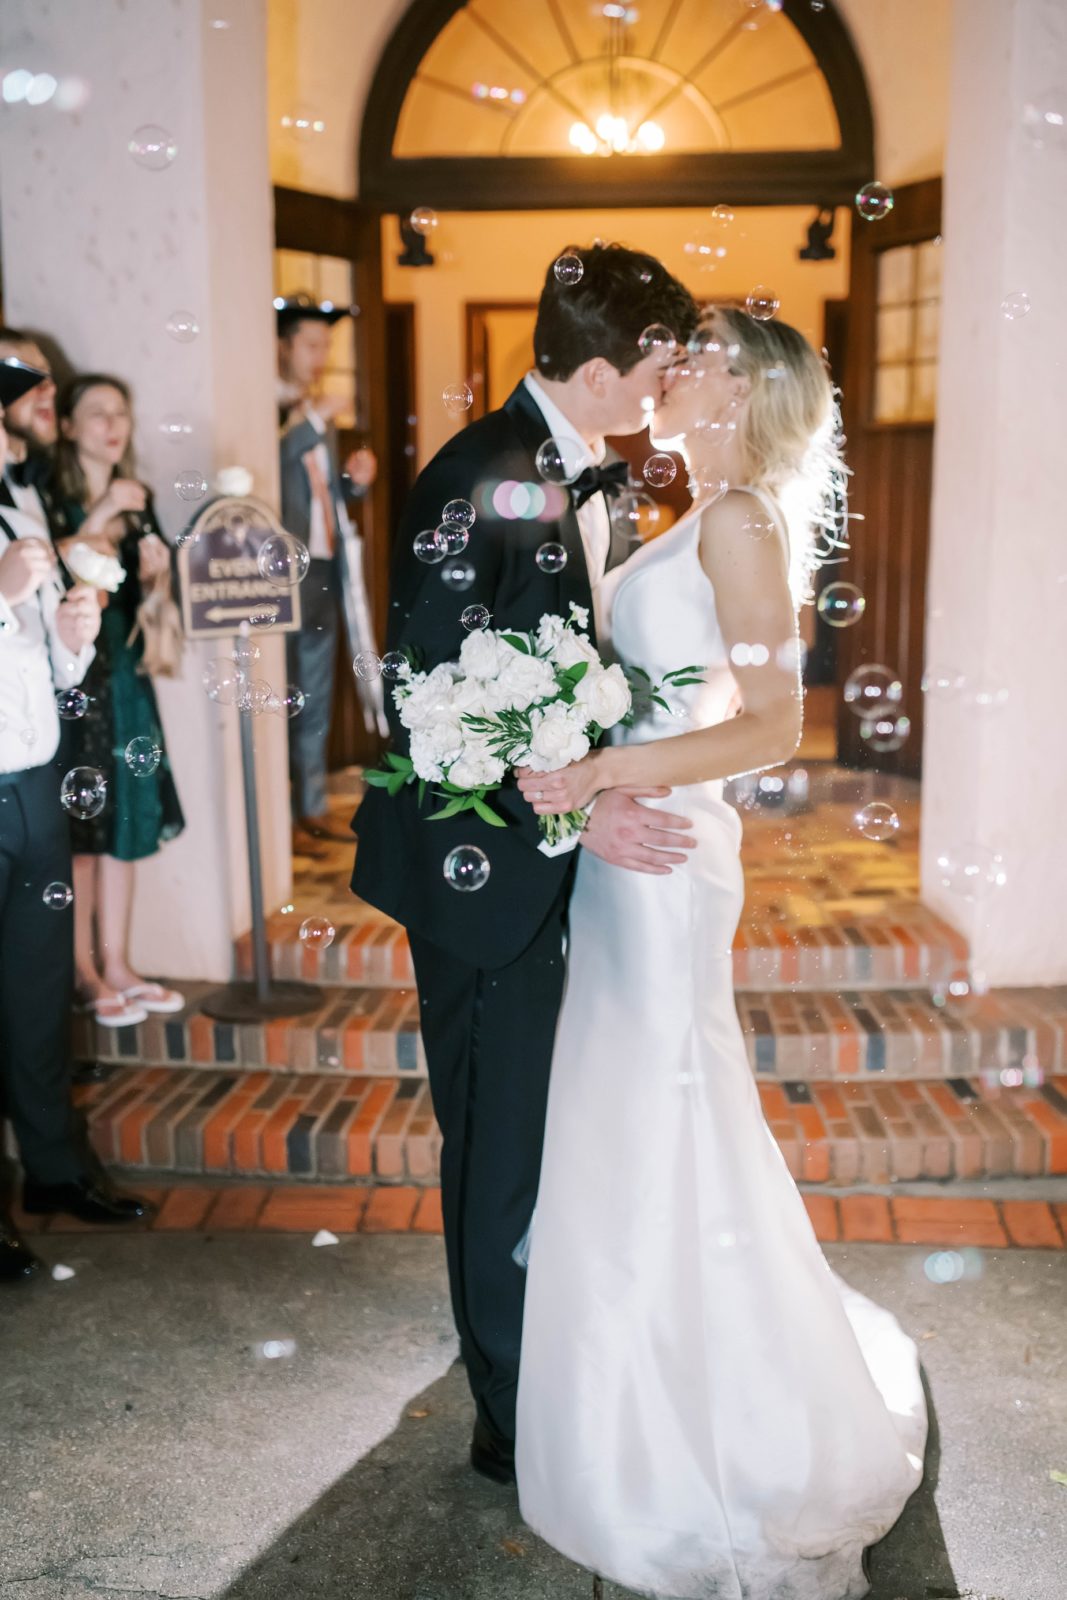 Newlyweds kiss during a fun bubble send off by Christina Elliott Photography in Houston. Bubble send off creative wed send off #christinaelliottphotography #Houstonweddings #catholicchurchweddings #navyblue #sayIdo #Houstonweddingphotographers